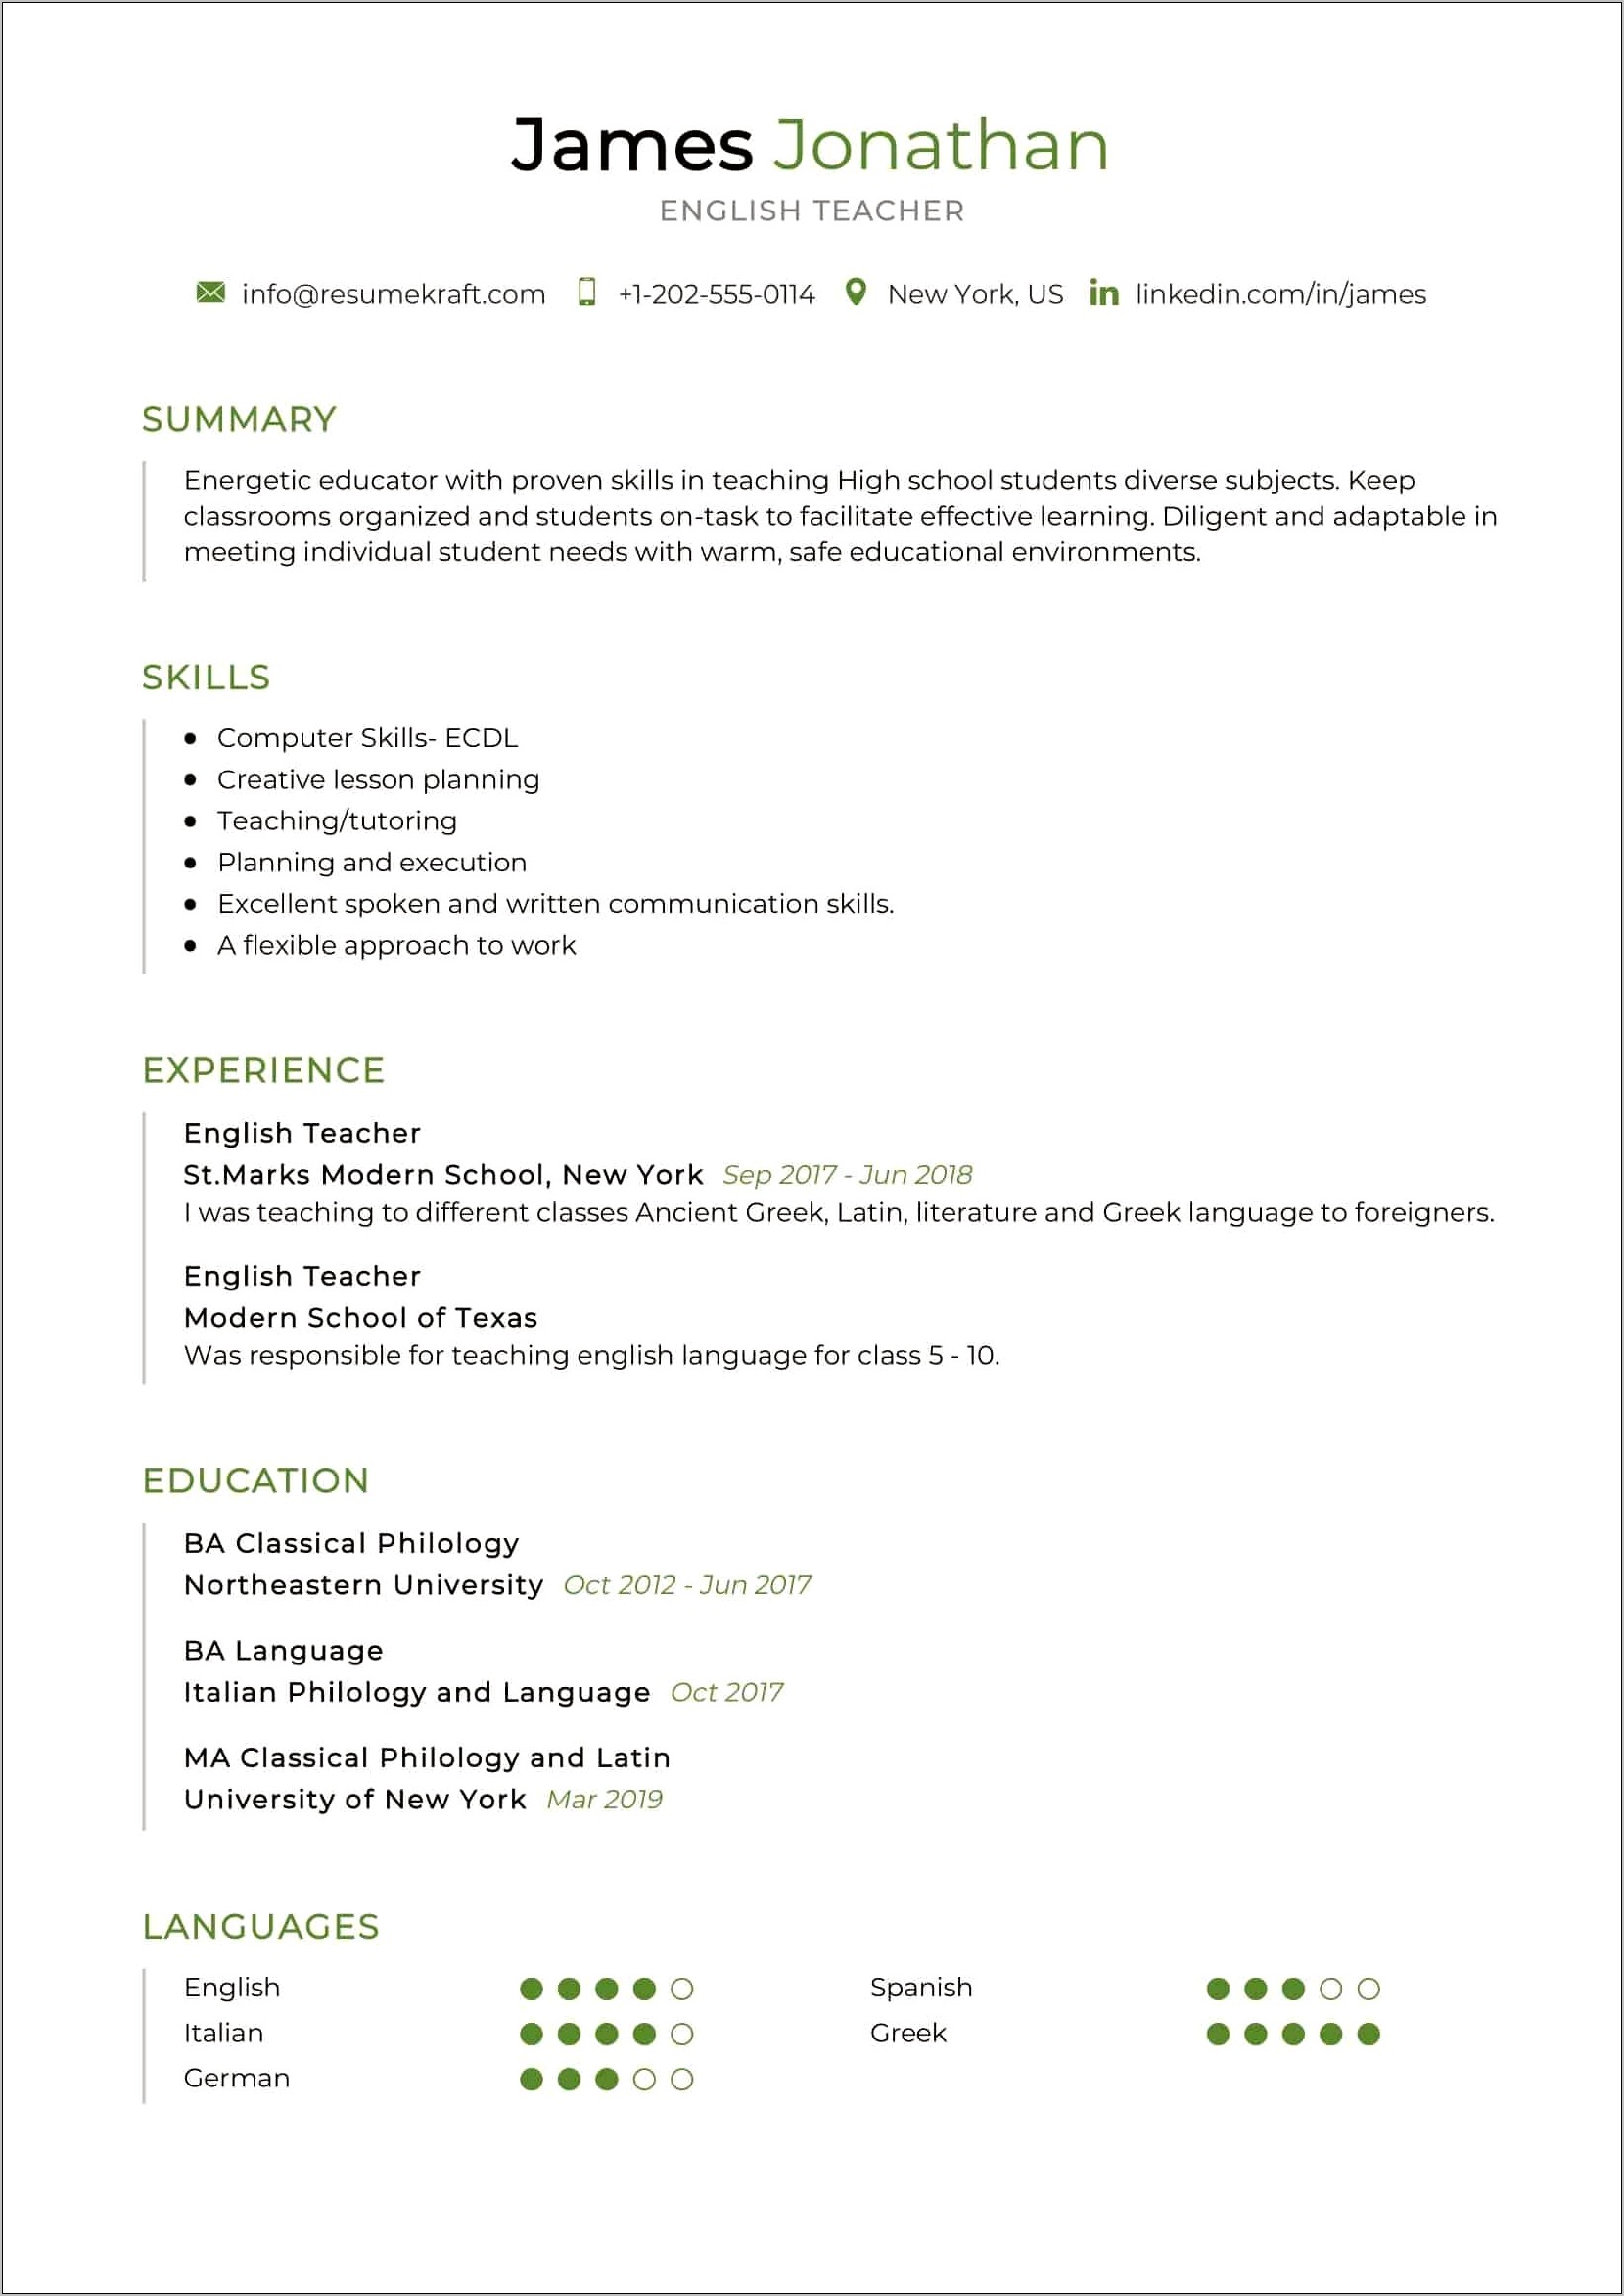 resume-writing-for-high-school-students-pdf-resume-example-gallery